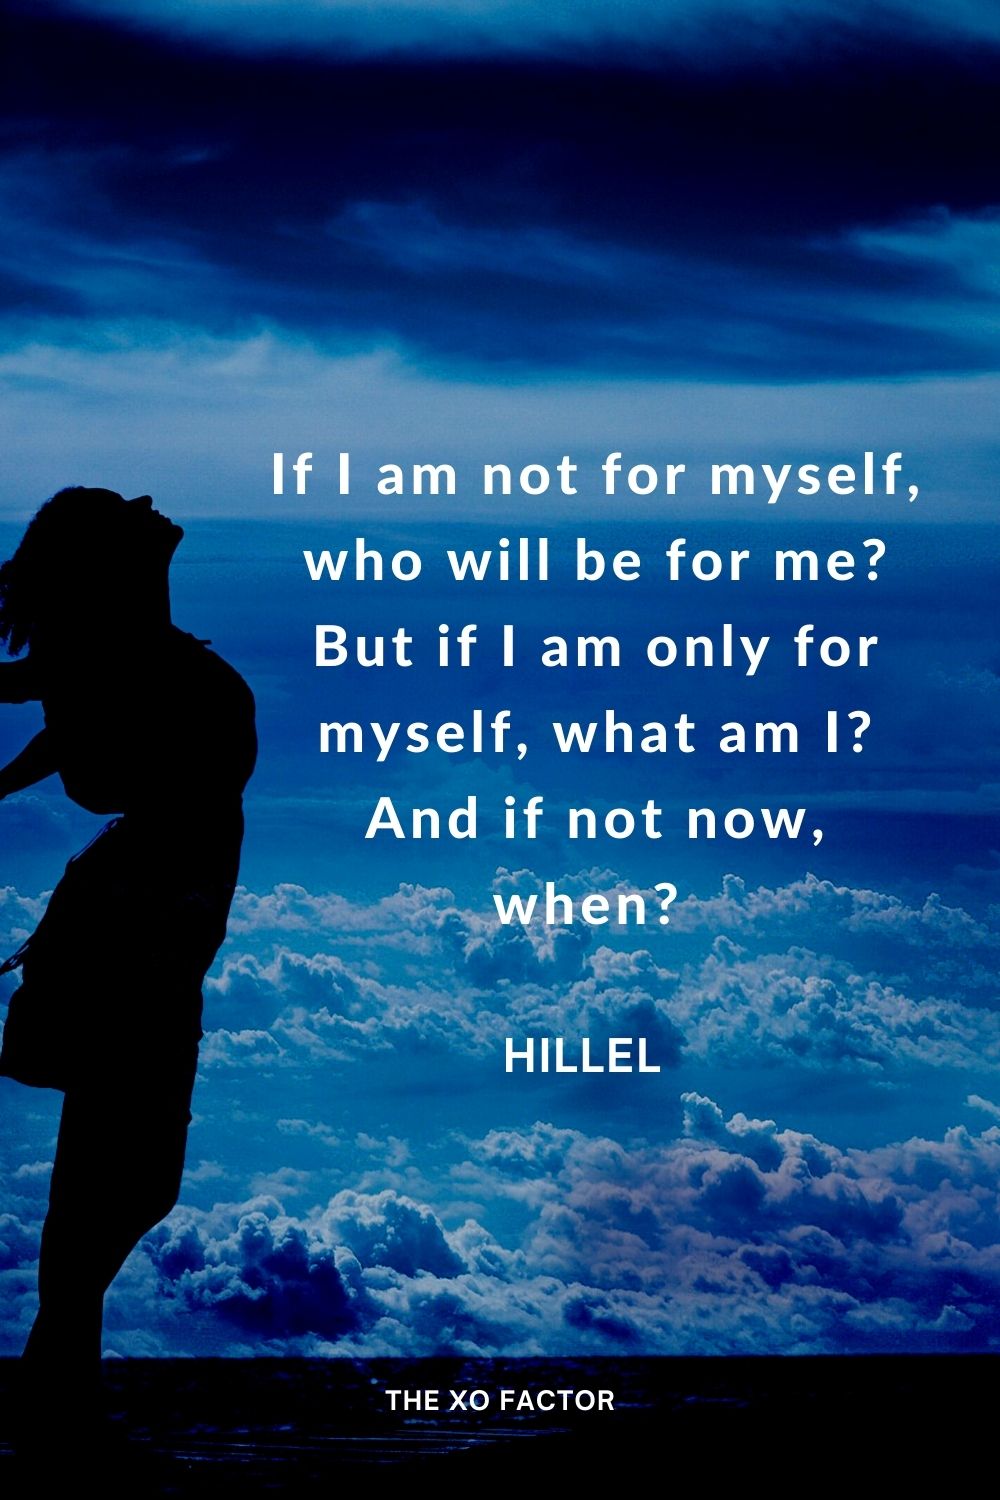 If I am not for myself, who will be for me? But if I am only for myself, what am I? And if not now, when?  Hillel